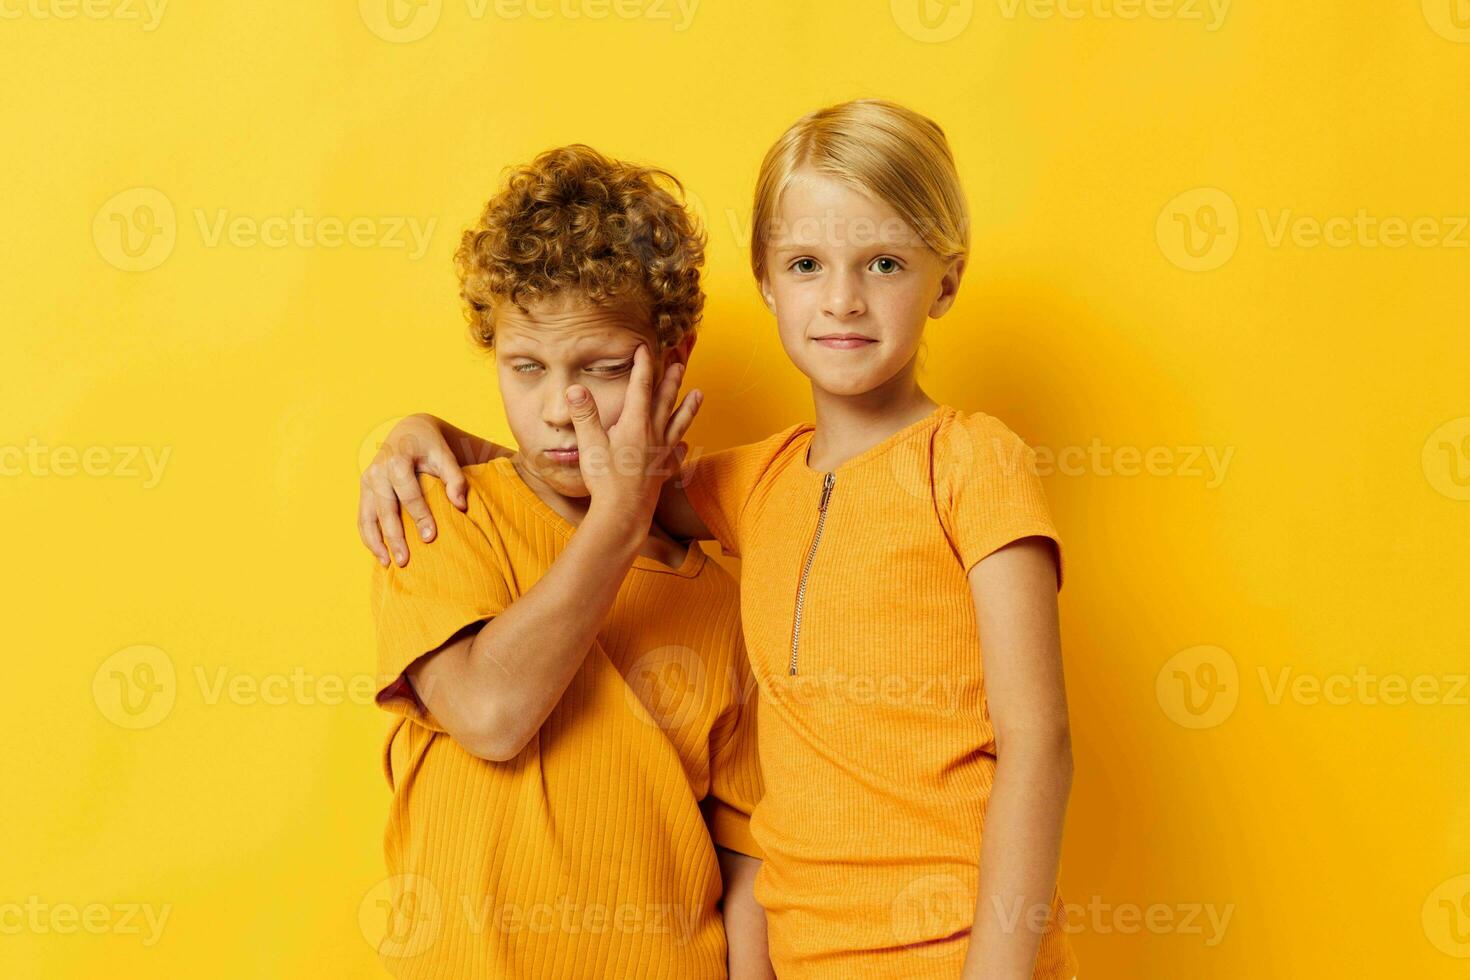 cheerful children in yellow t-shirts standing side by side childhood emotions yellow background unaltered photo